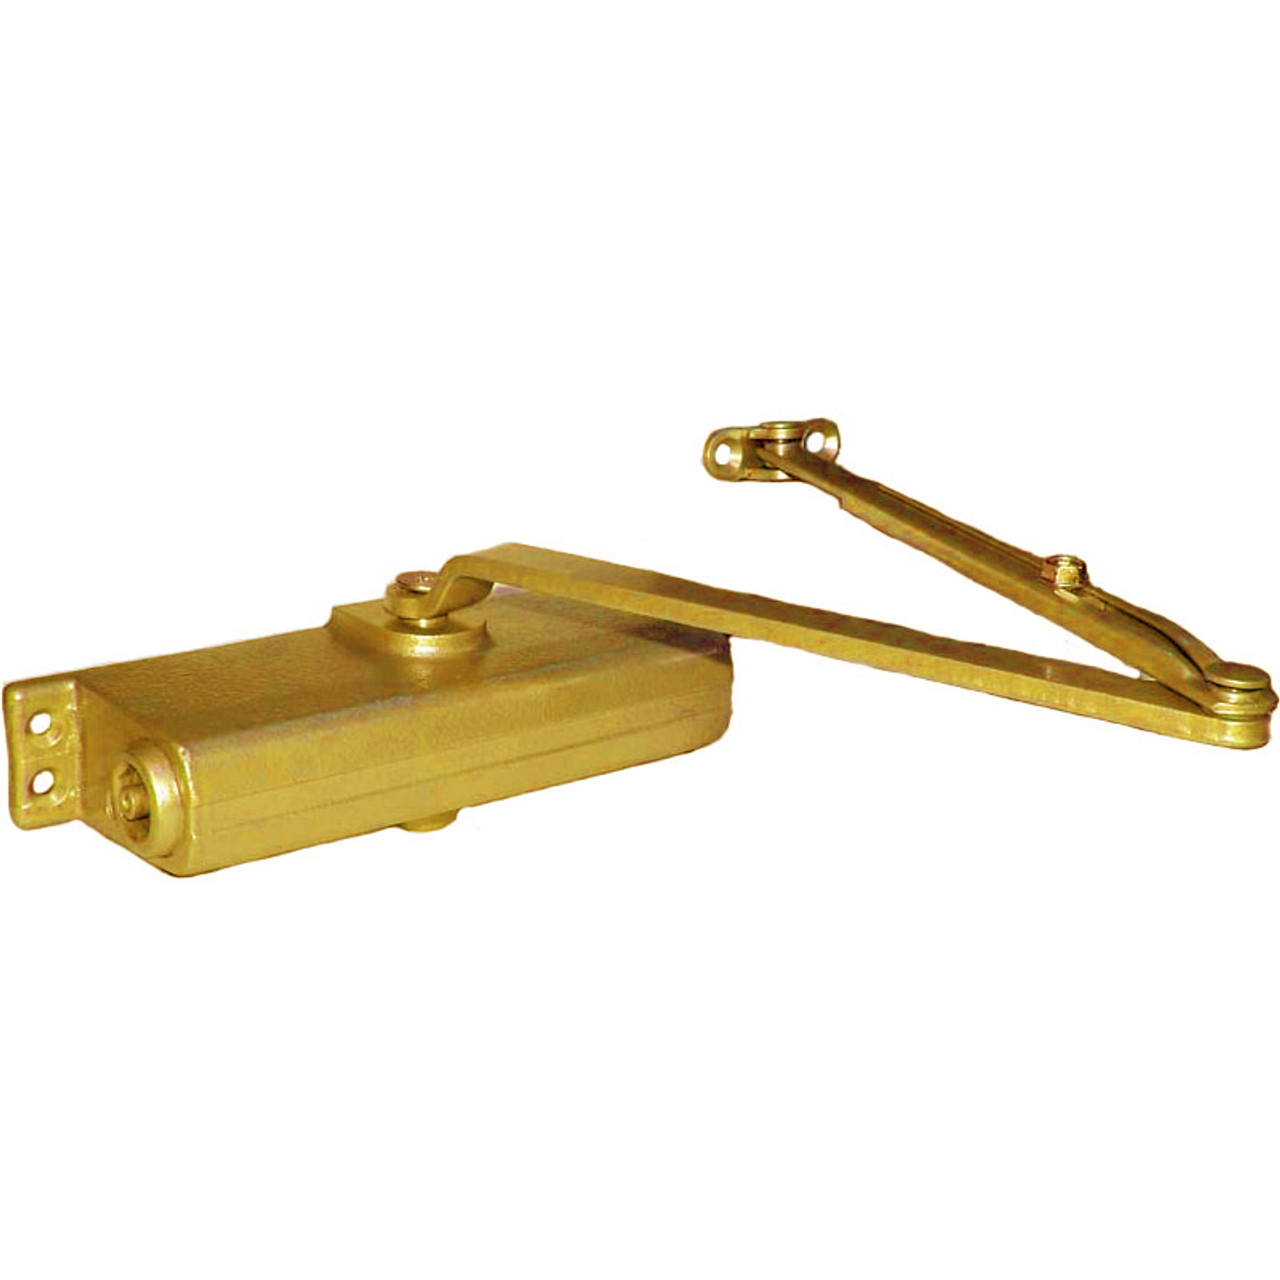 1261-HEDA-RH-BRASS LCN Door Closer with Hold Open Extra Duty Arm in Brass Finish